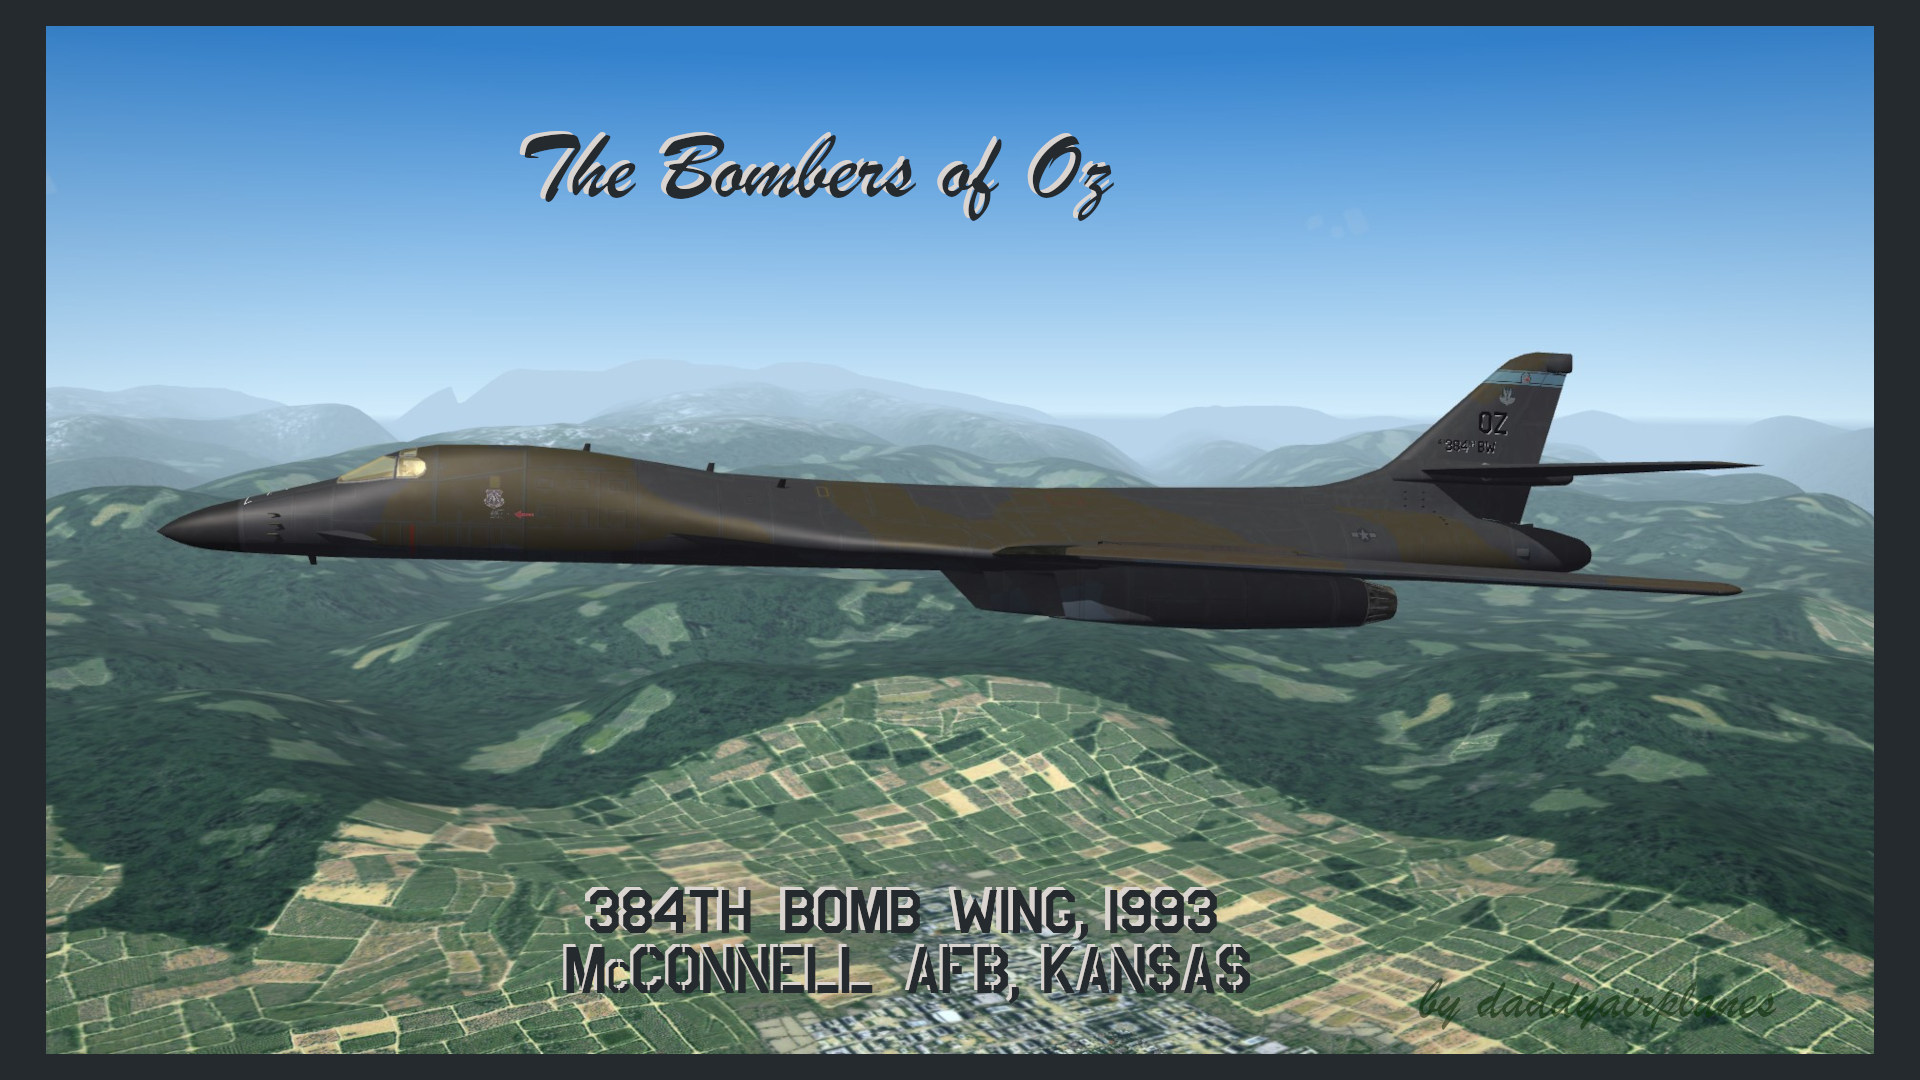 The Bombers of Oz: a 384th Bomb Wing skin